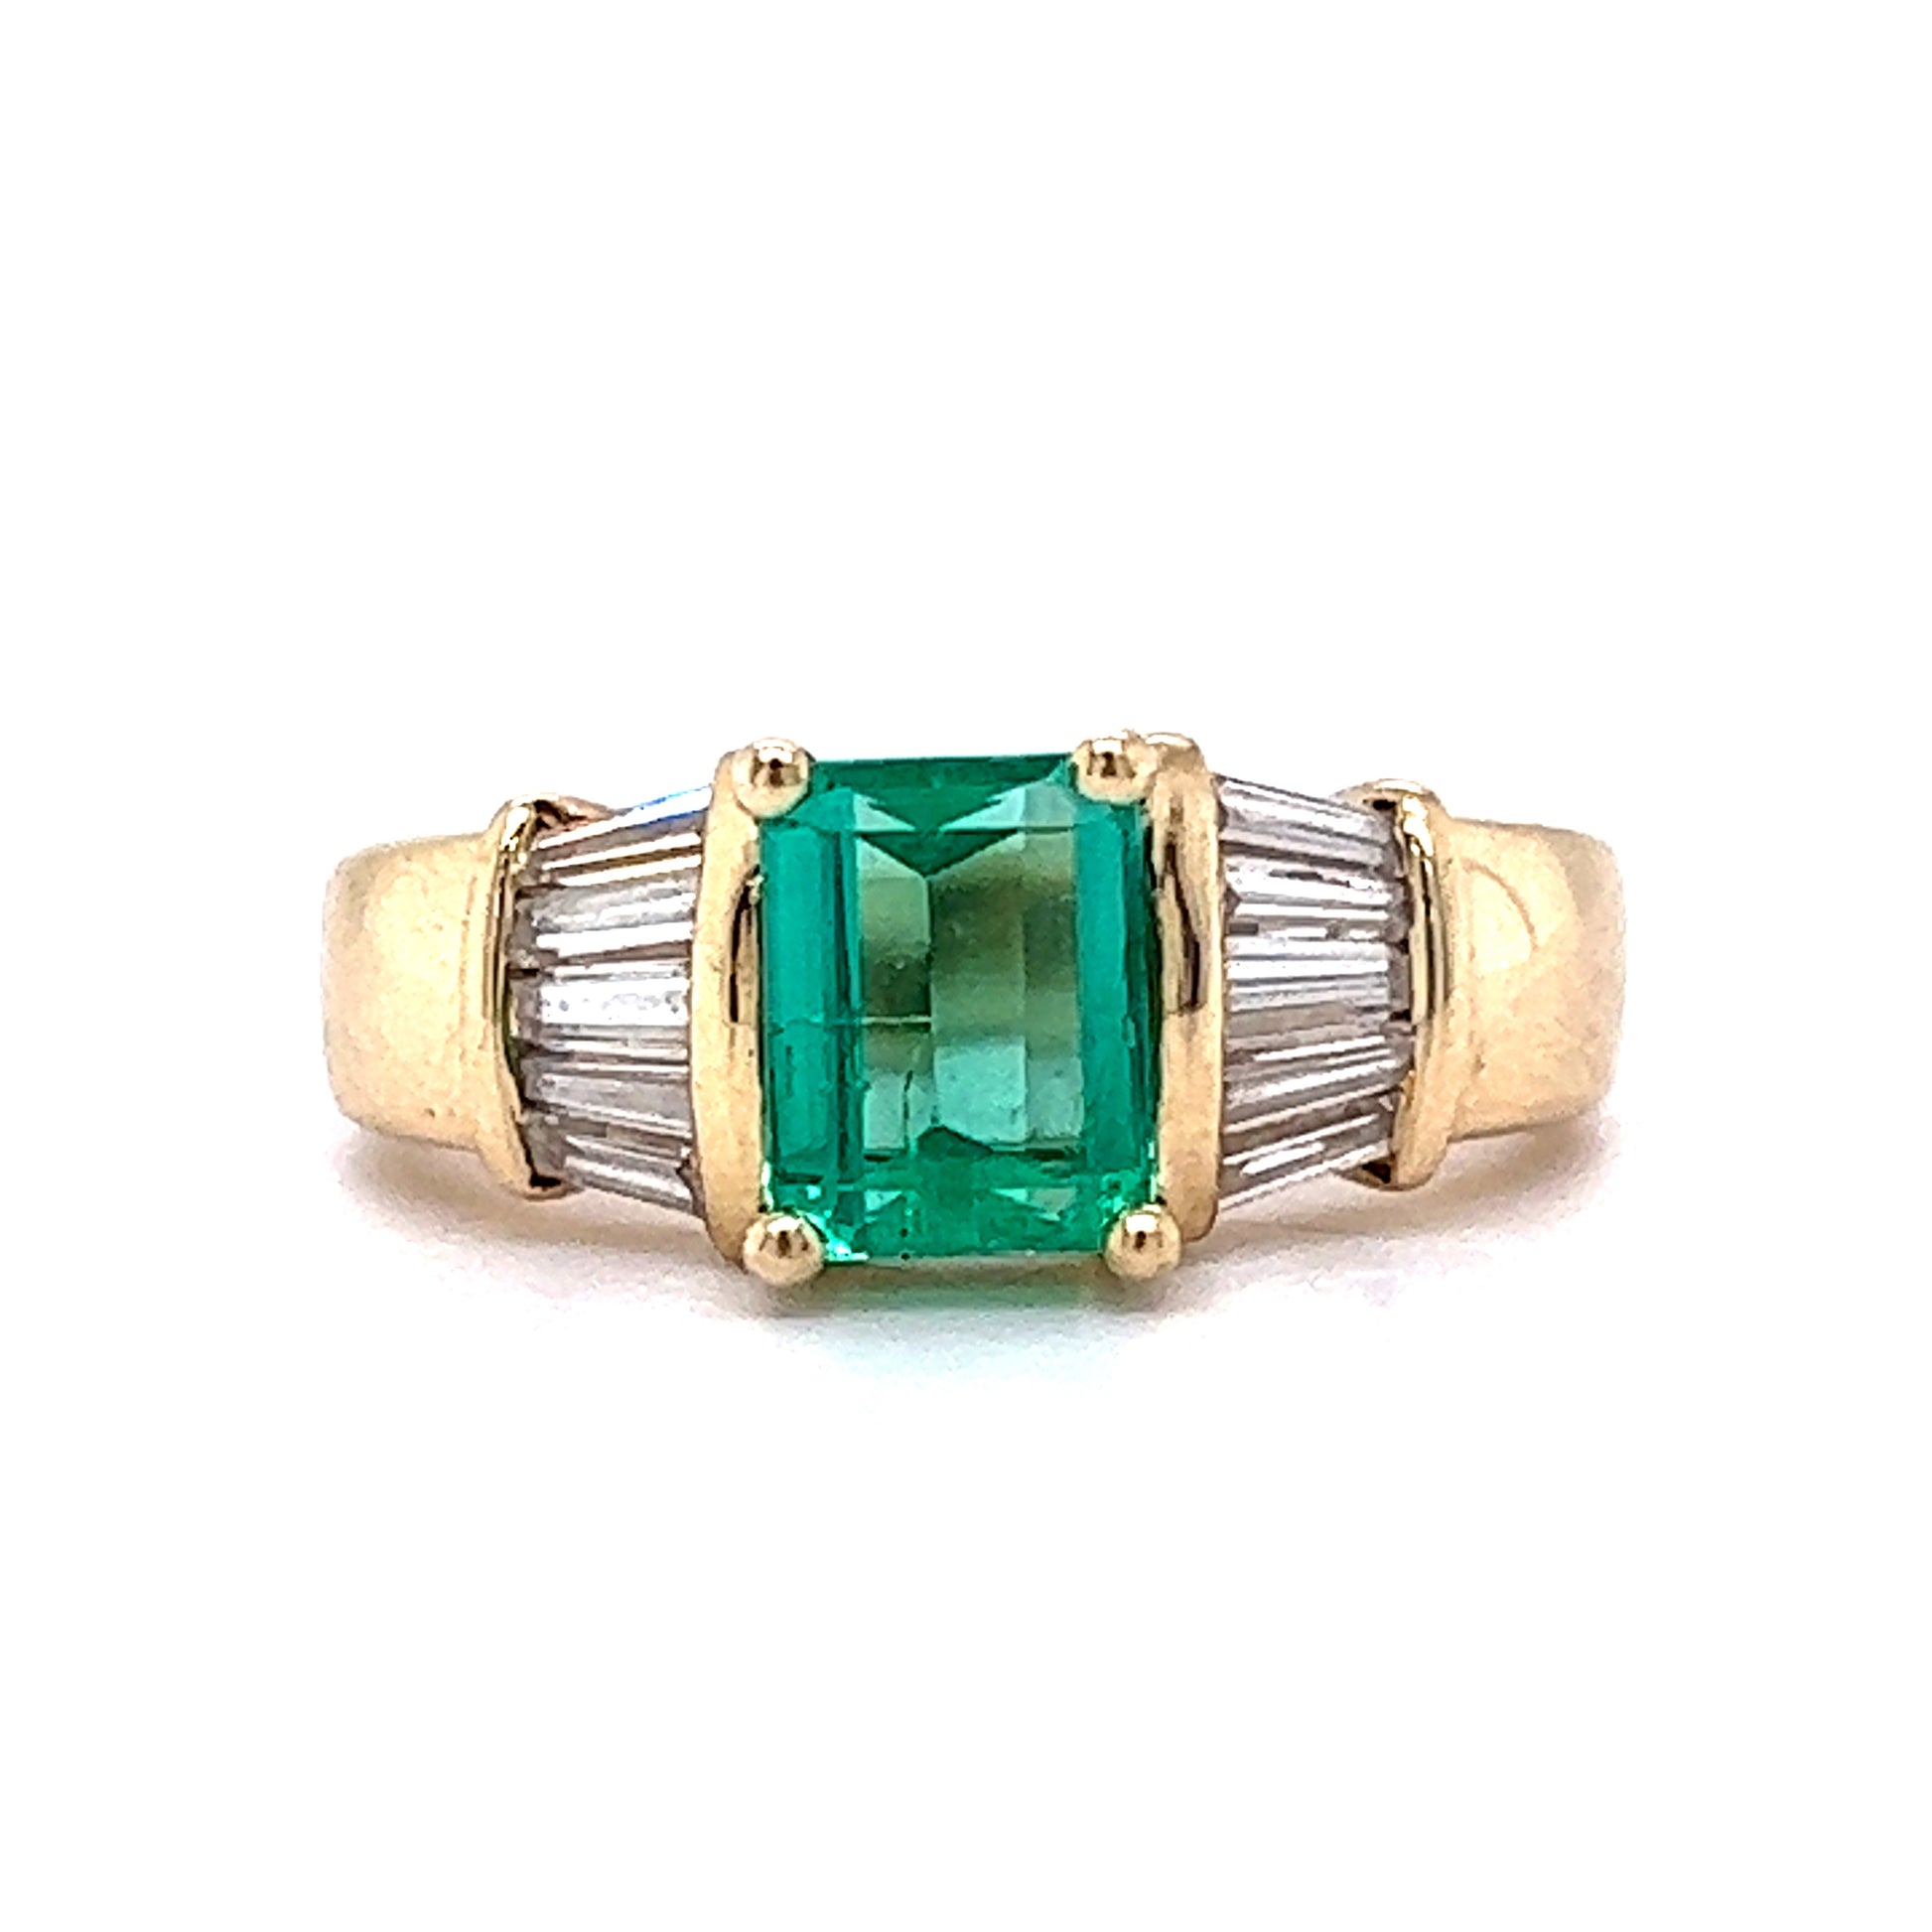 .88 Emerald & Diamond Engagement Ring in 14k Yellow GoldComposition: 14 Karat Yellow GoldRing Size: 4.0Total Diamond Weight: .14 ctTotal Gram Weight: 4.6 gInscription: 14k